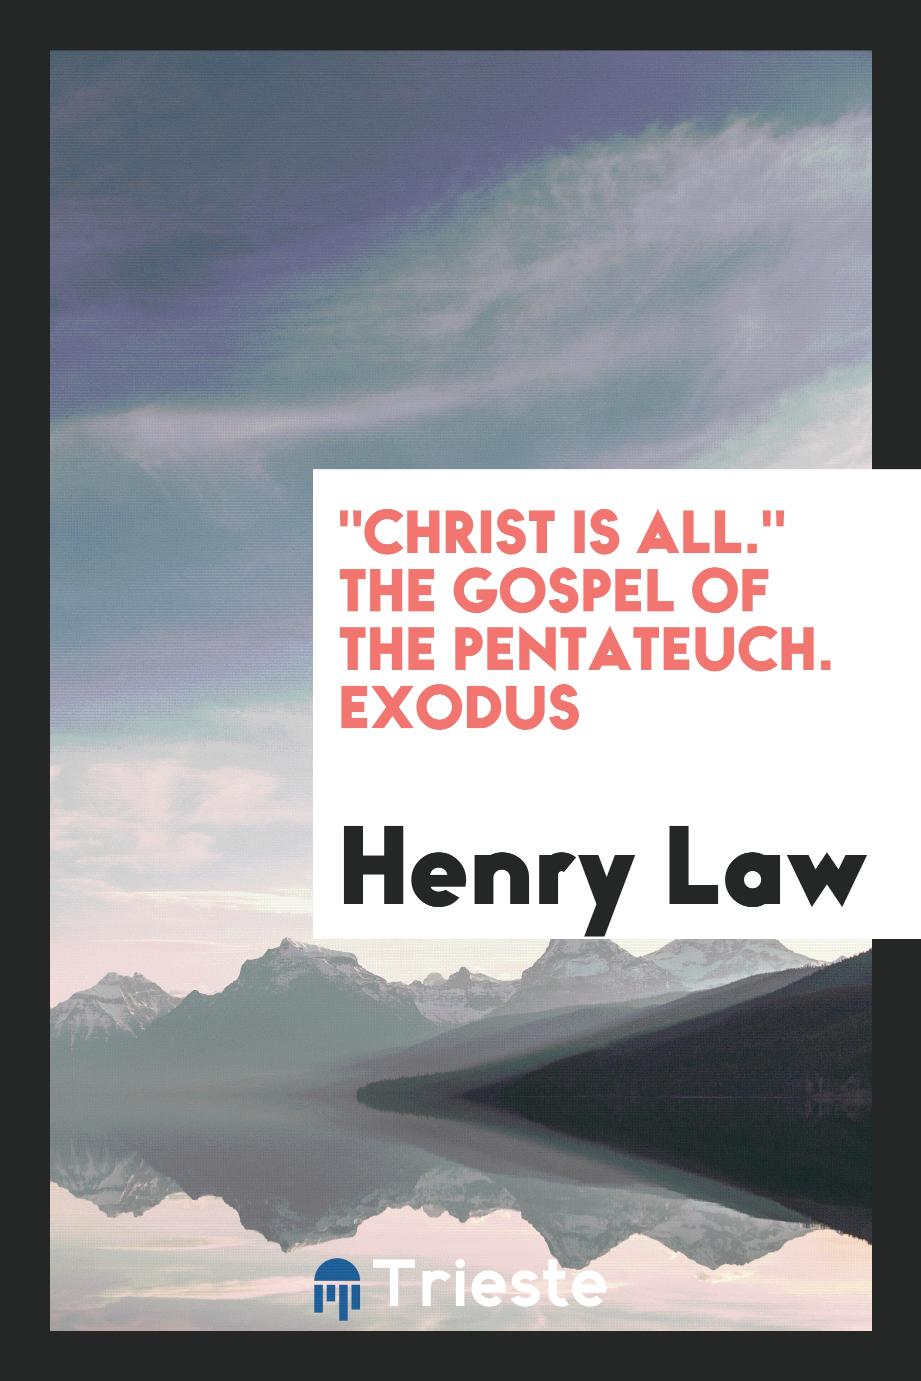 Henry Law - "Christ Is All." the Gospel of the Pentateuch. Exodus